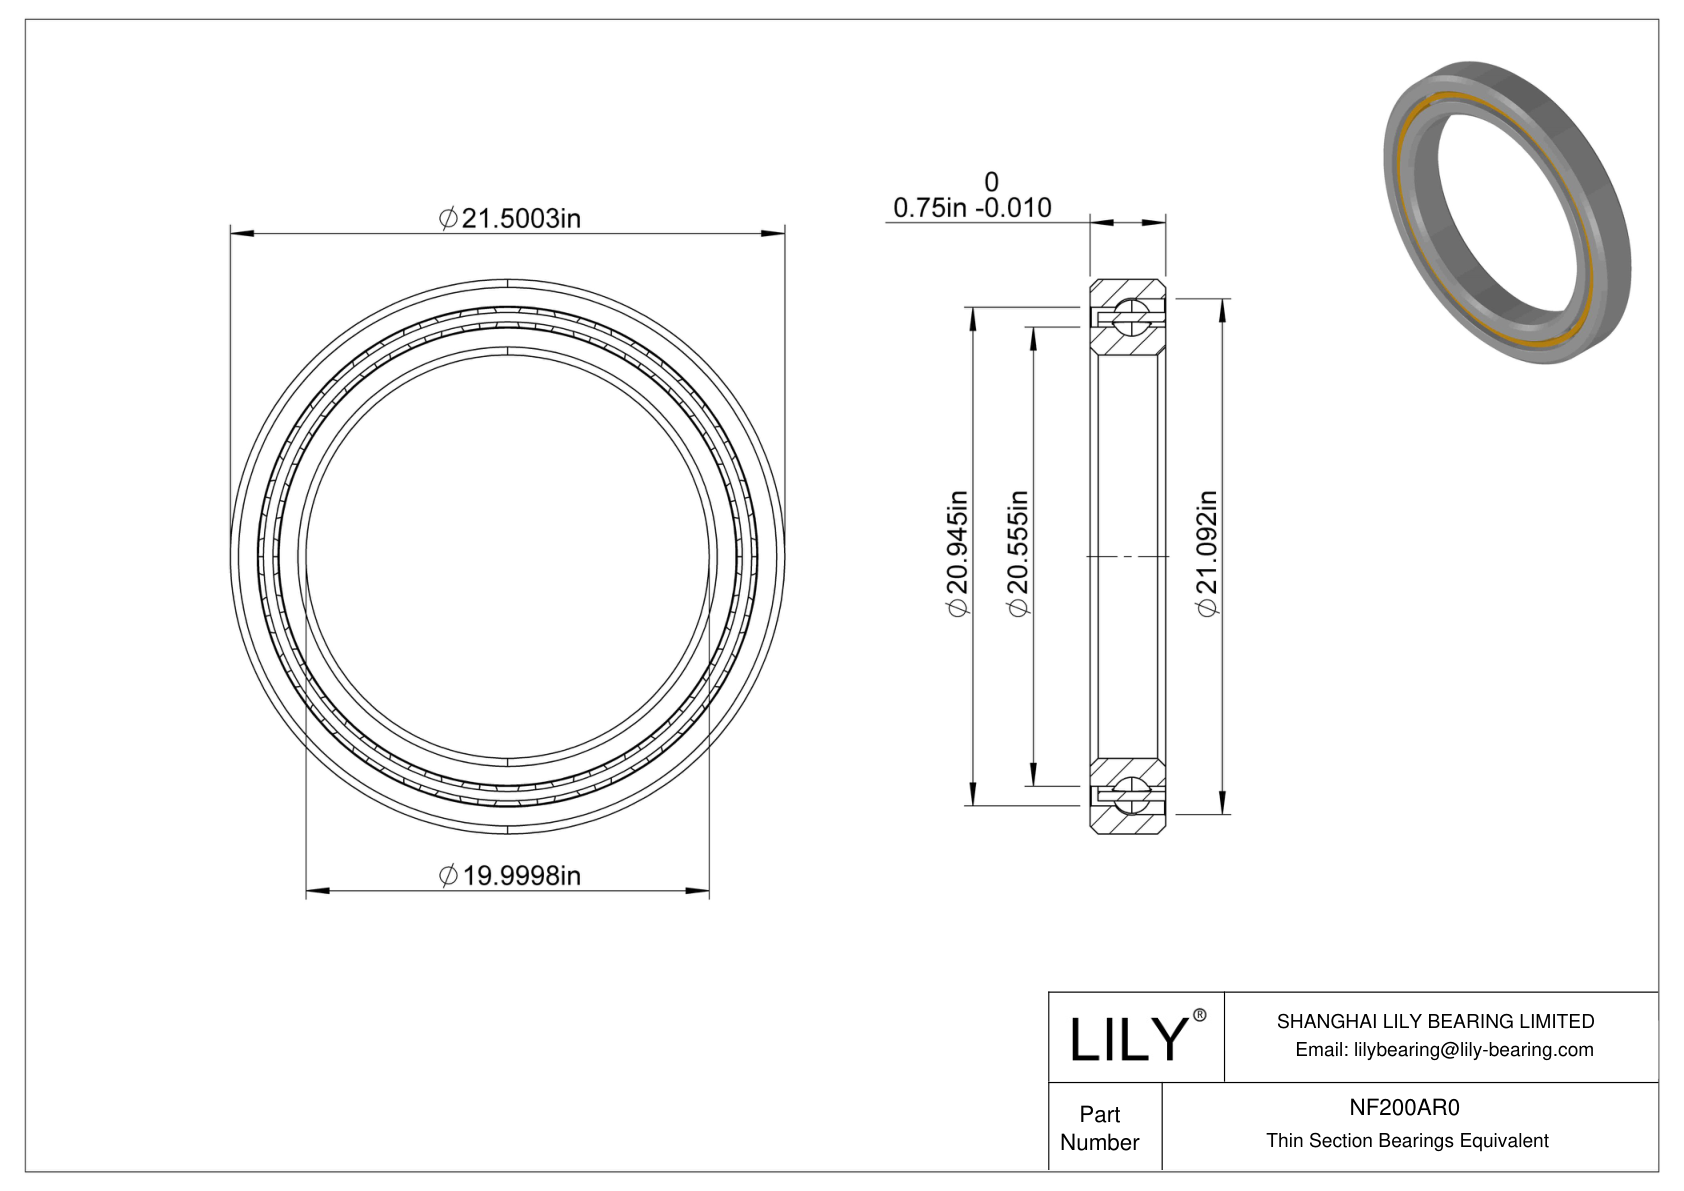 NF200AR0 Constant Section (CS) Bearings cad drawing